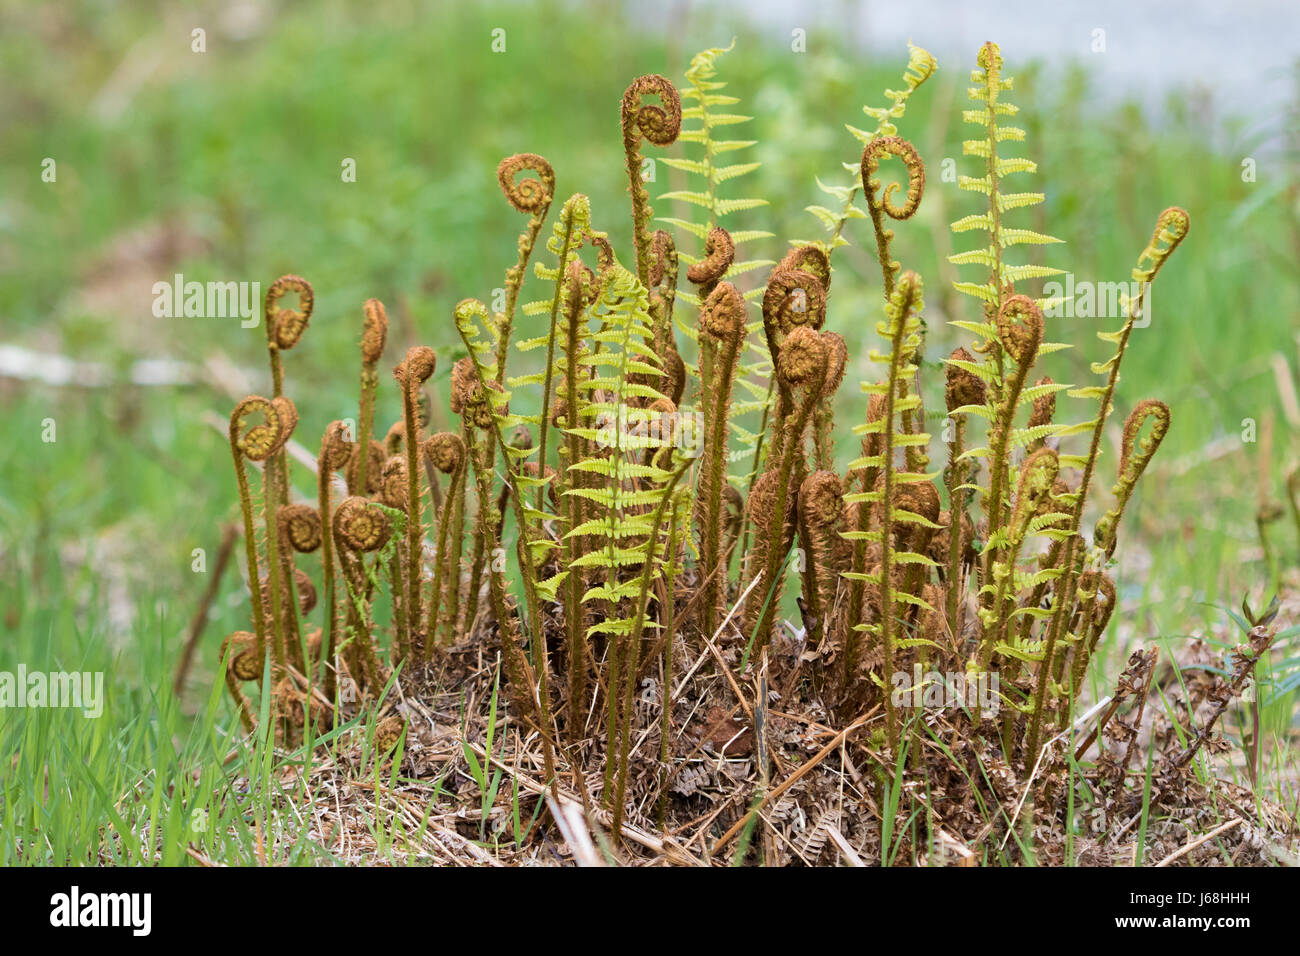 Scaly Male Fern (Dryopteris affinis) Stock Photo